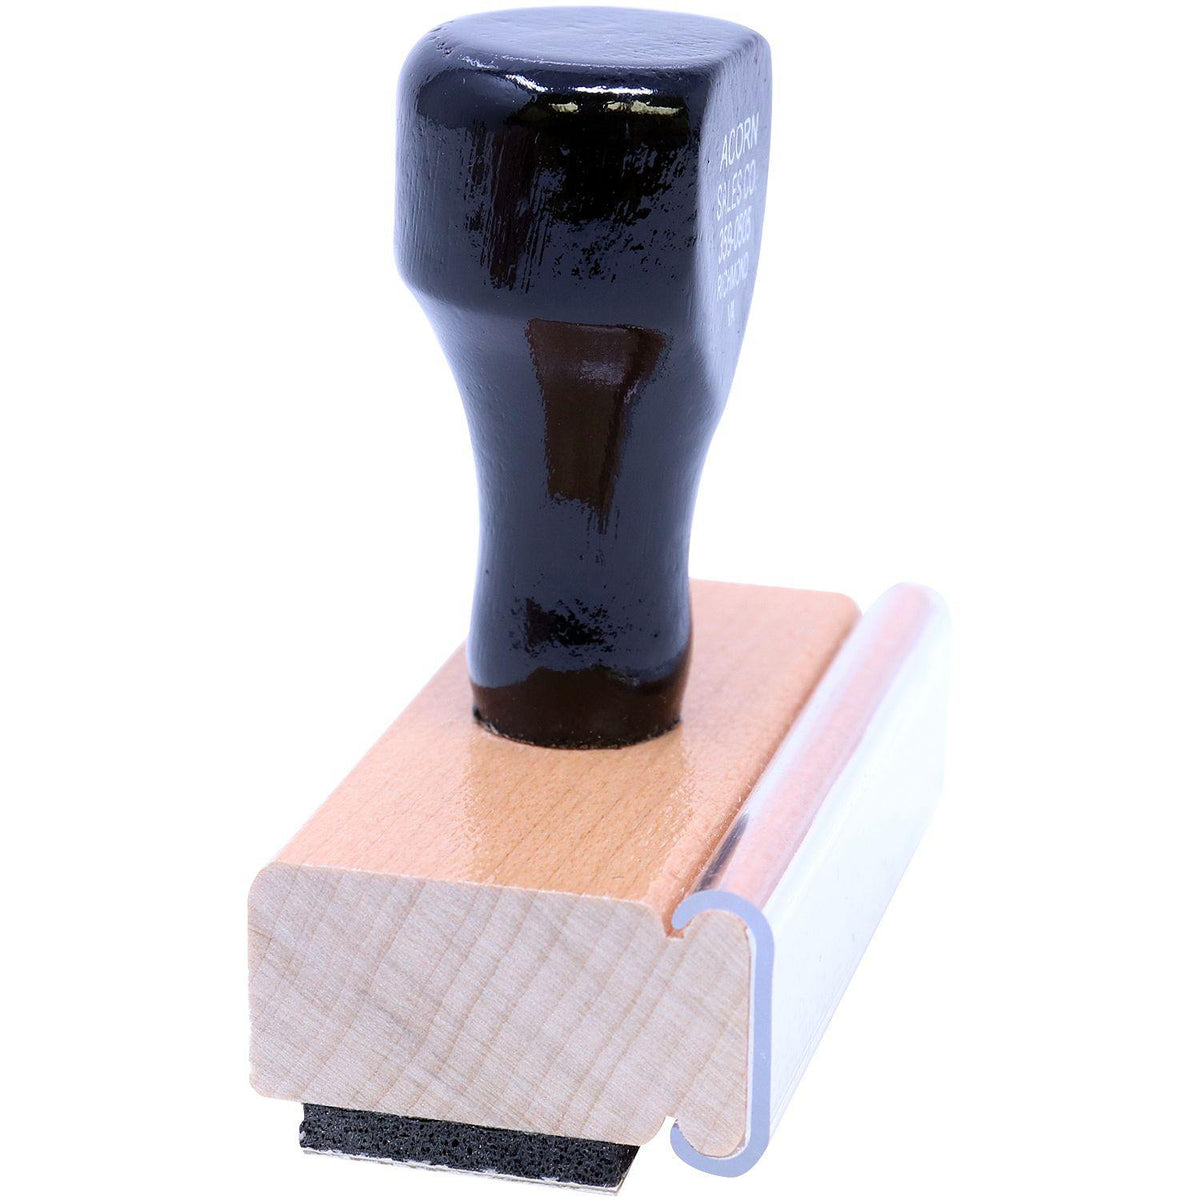 Side View of Your Work is Out of this world Rubber Stamp at an Angle